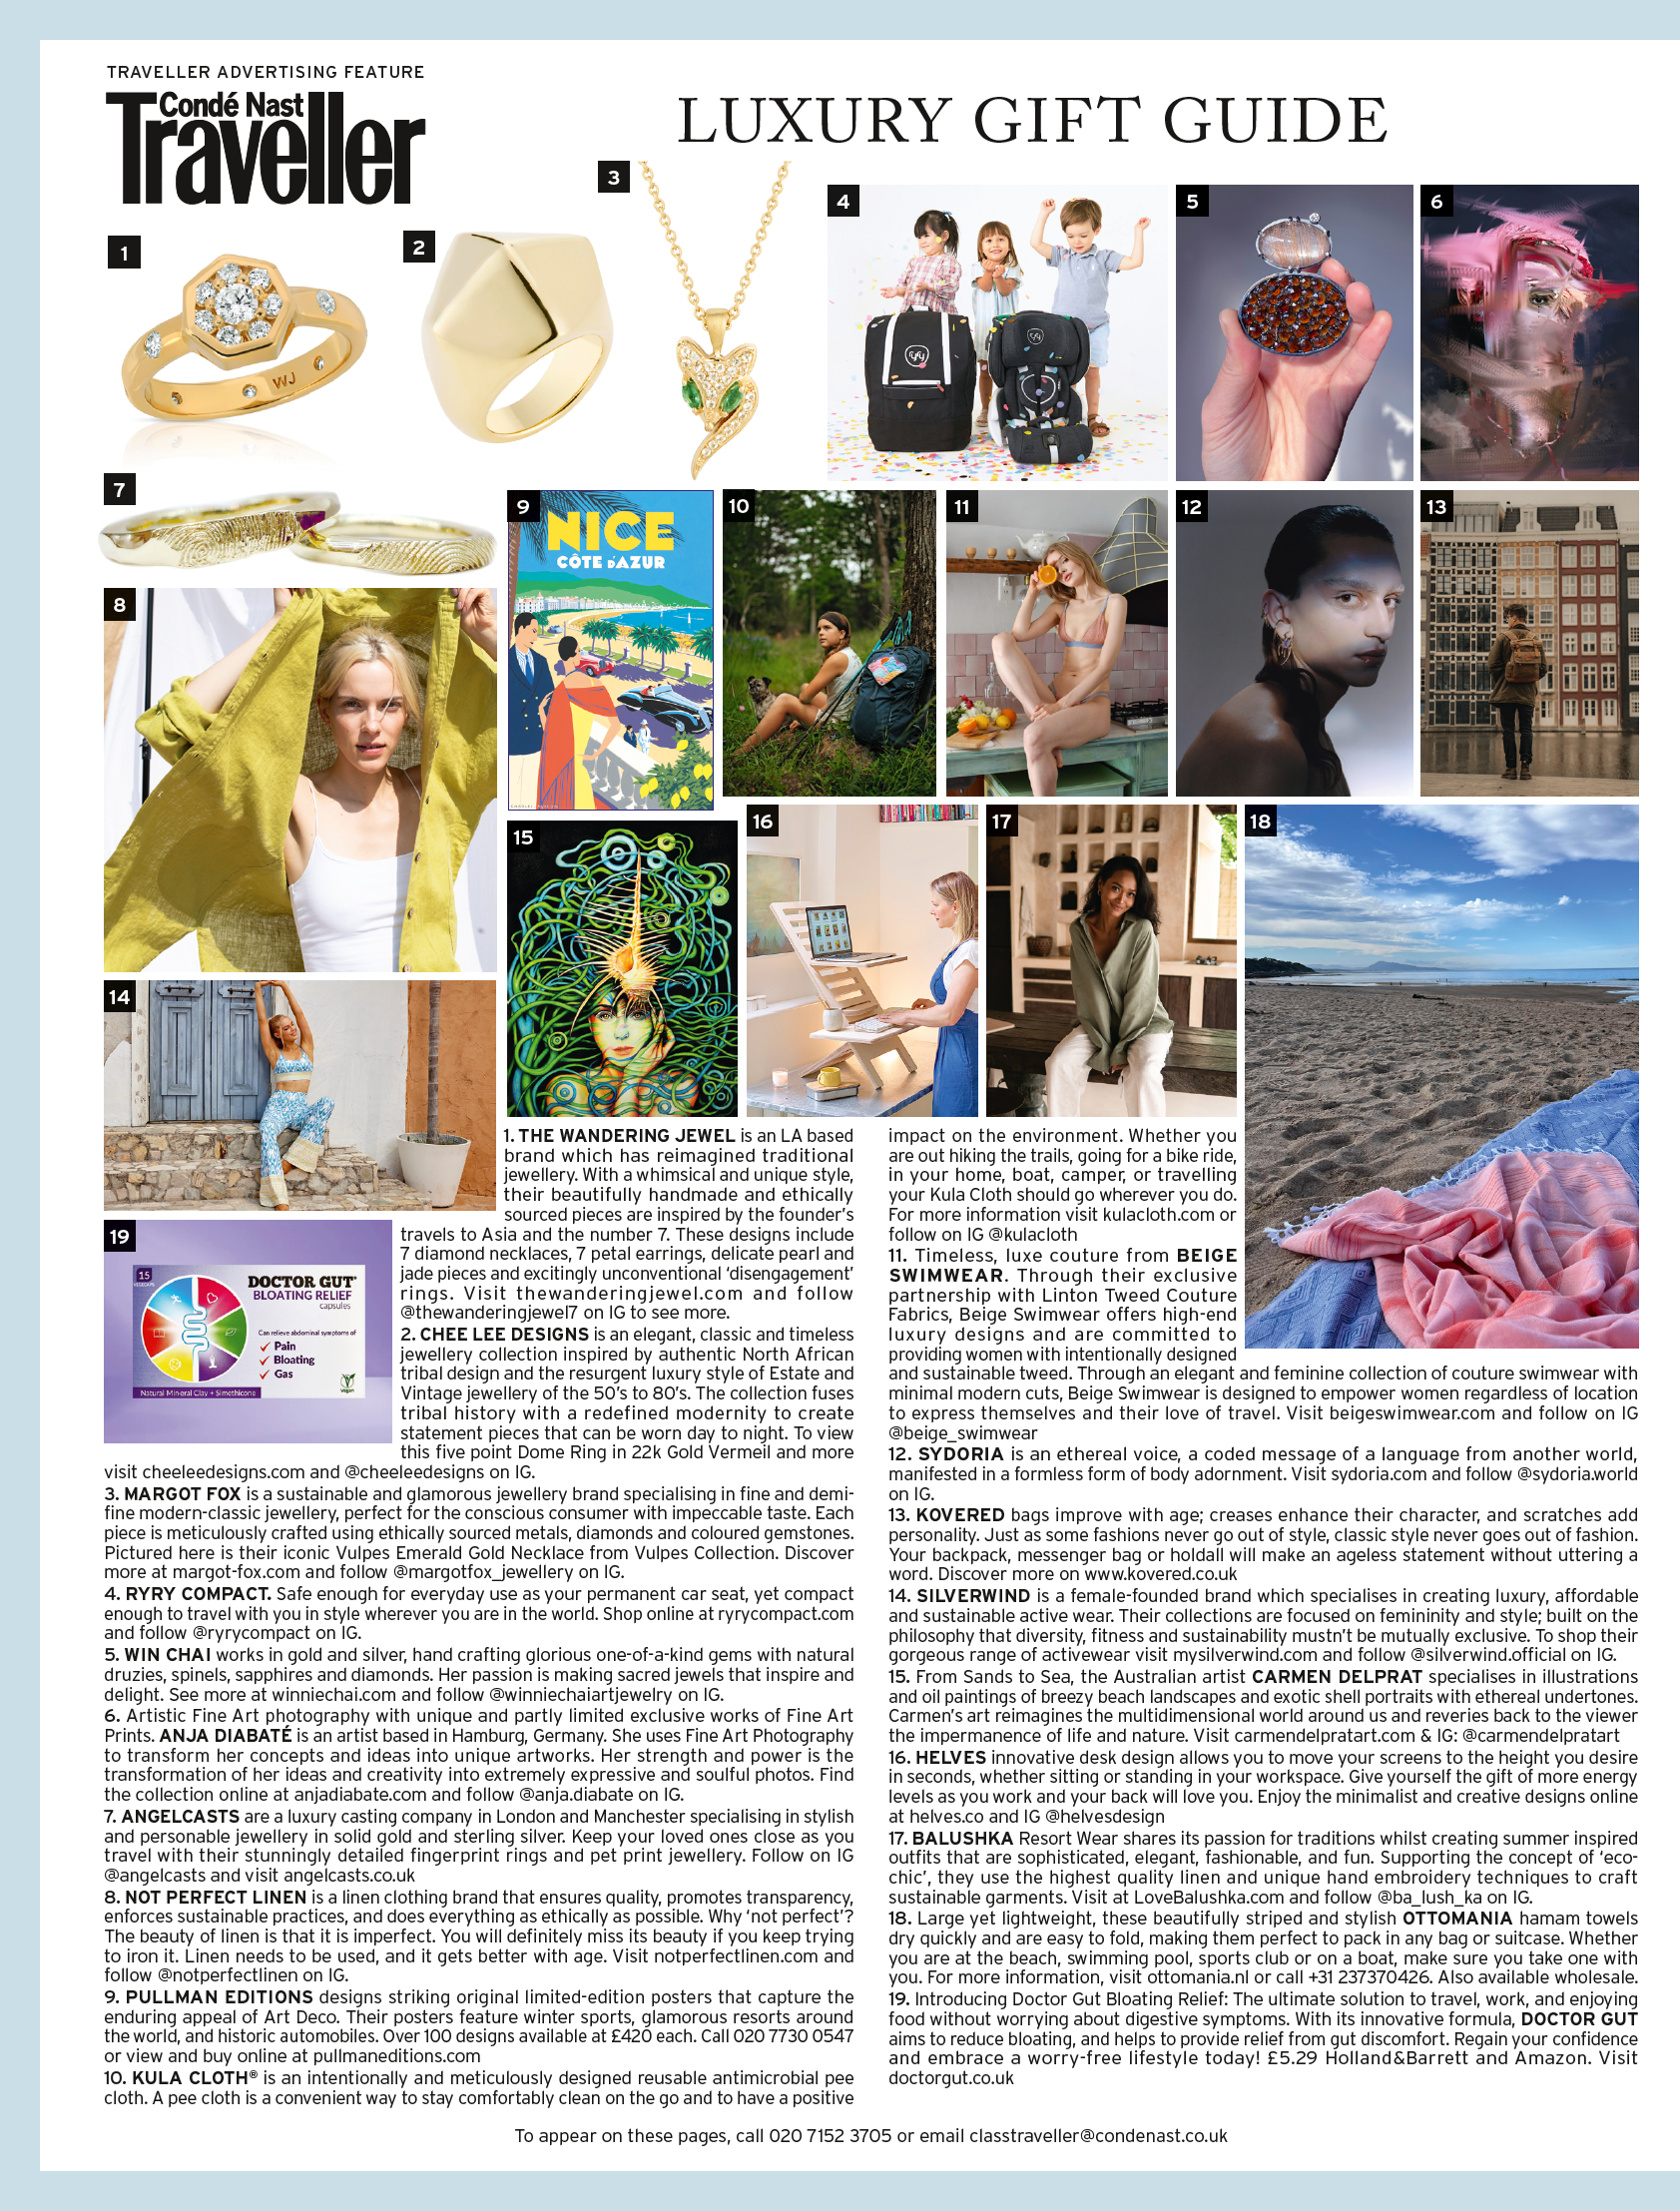 Conde Nast Traveller magazine featuring its luxury gift guide and the Septagon disengagement Ring from the wandering jewel